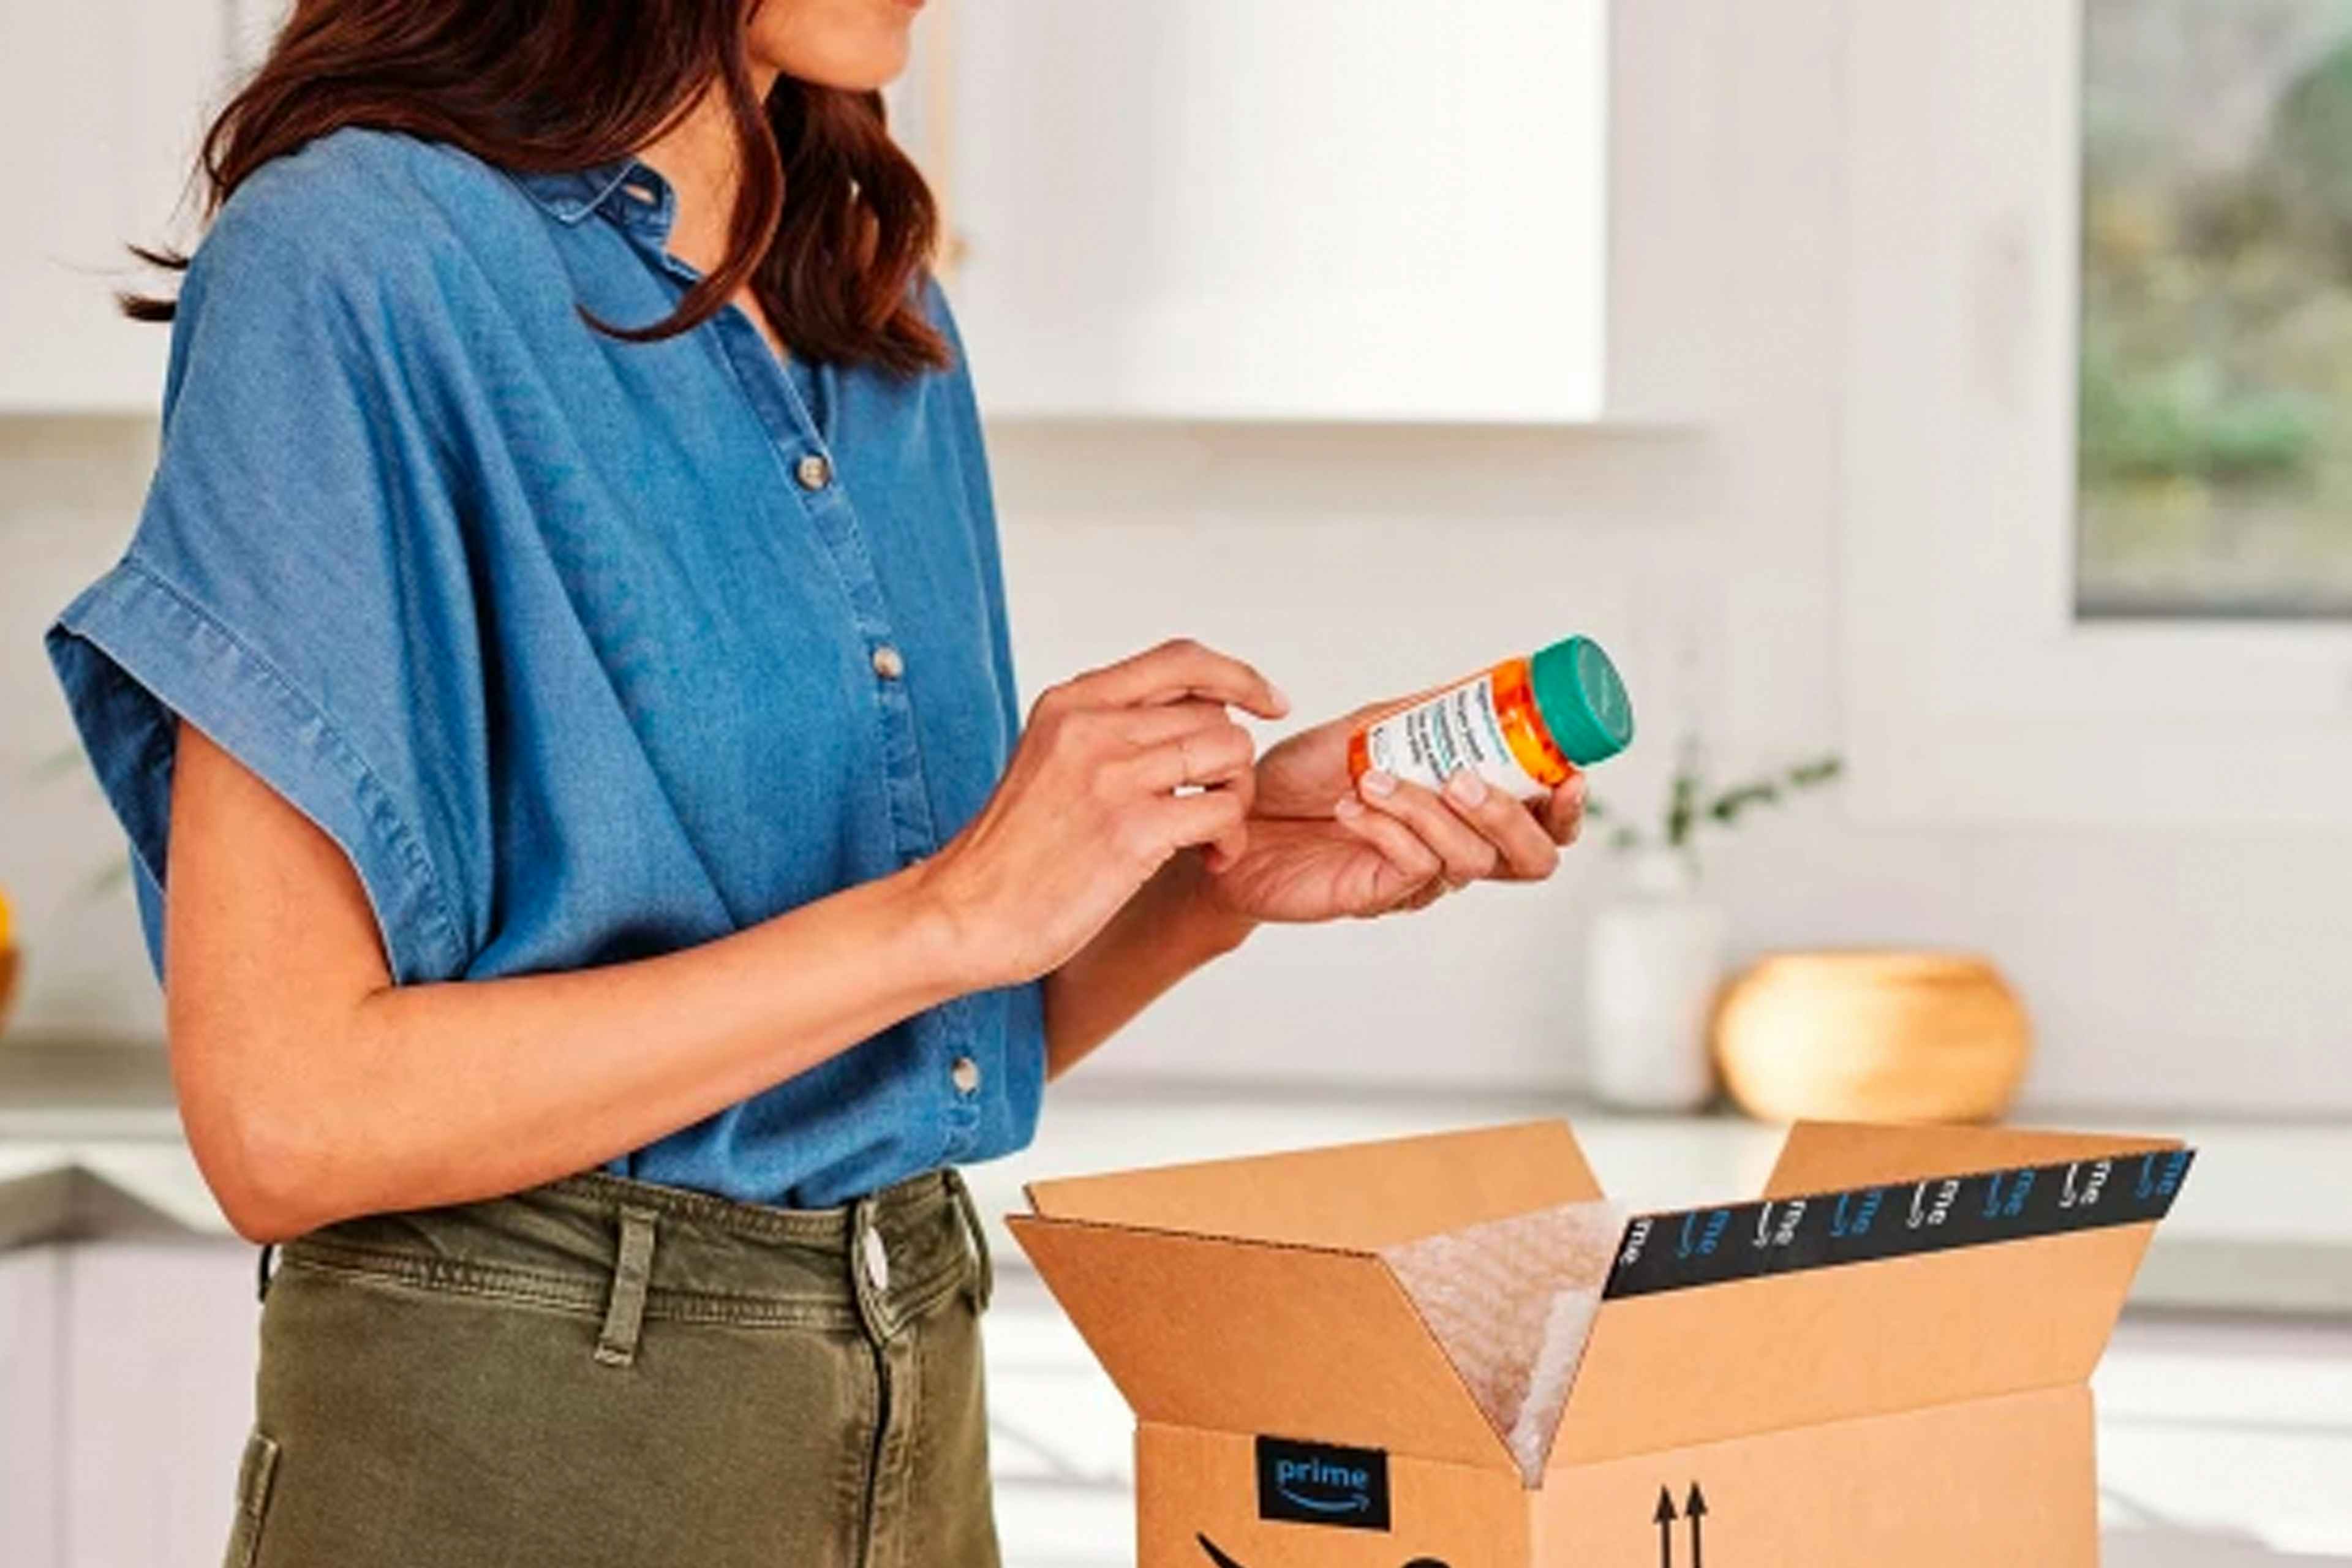 Woman looking at an pill bottle from amazon